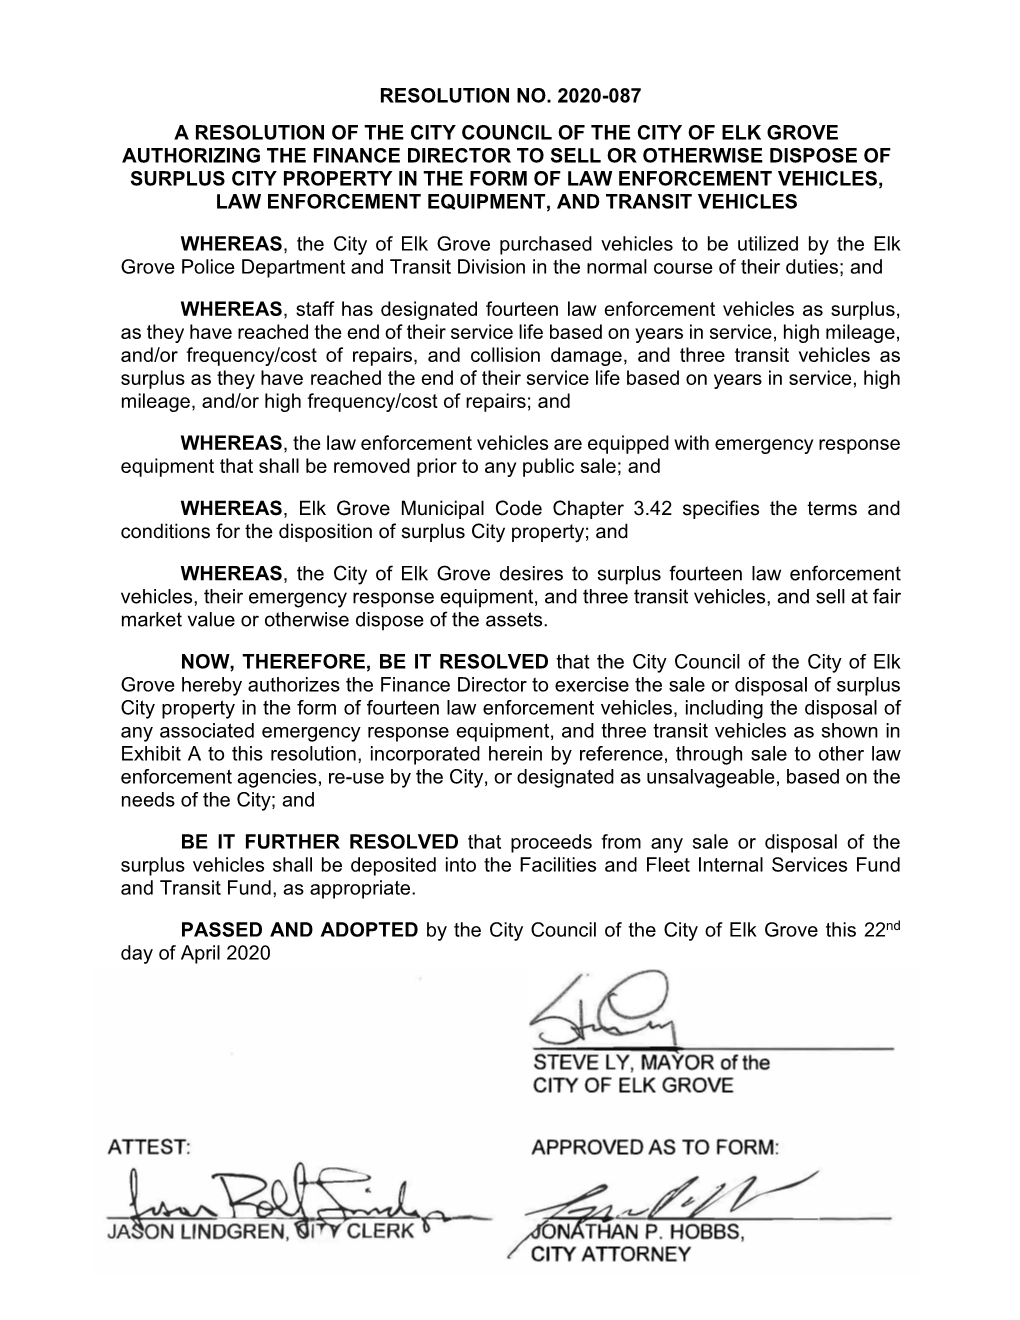 Resolution No. 2020-087 a Resolution of the City